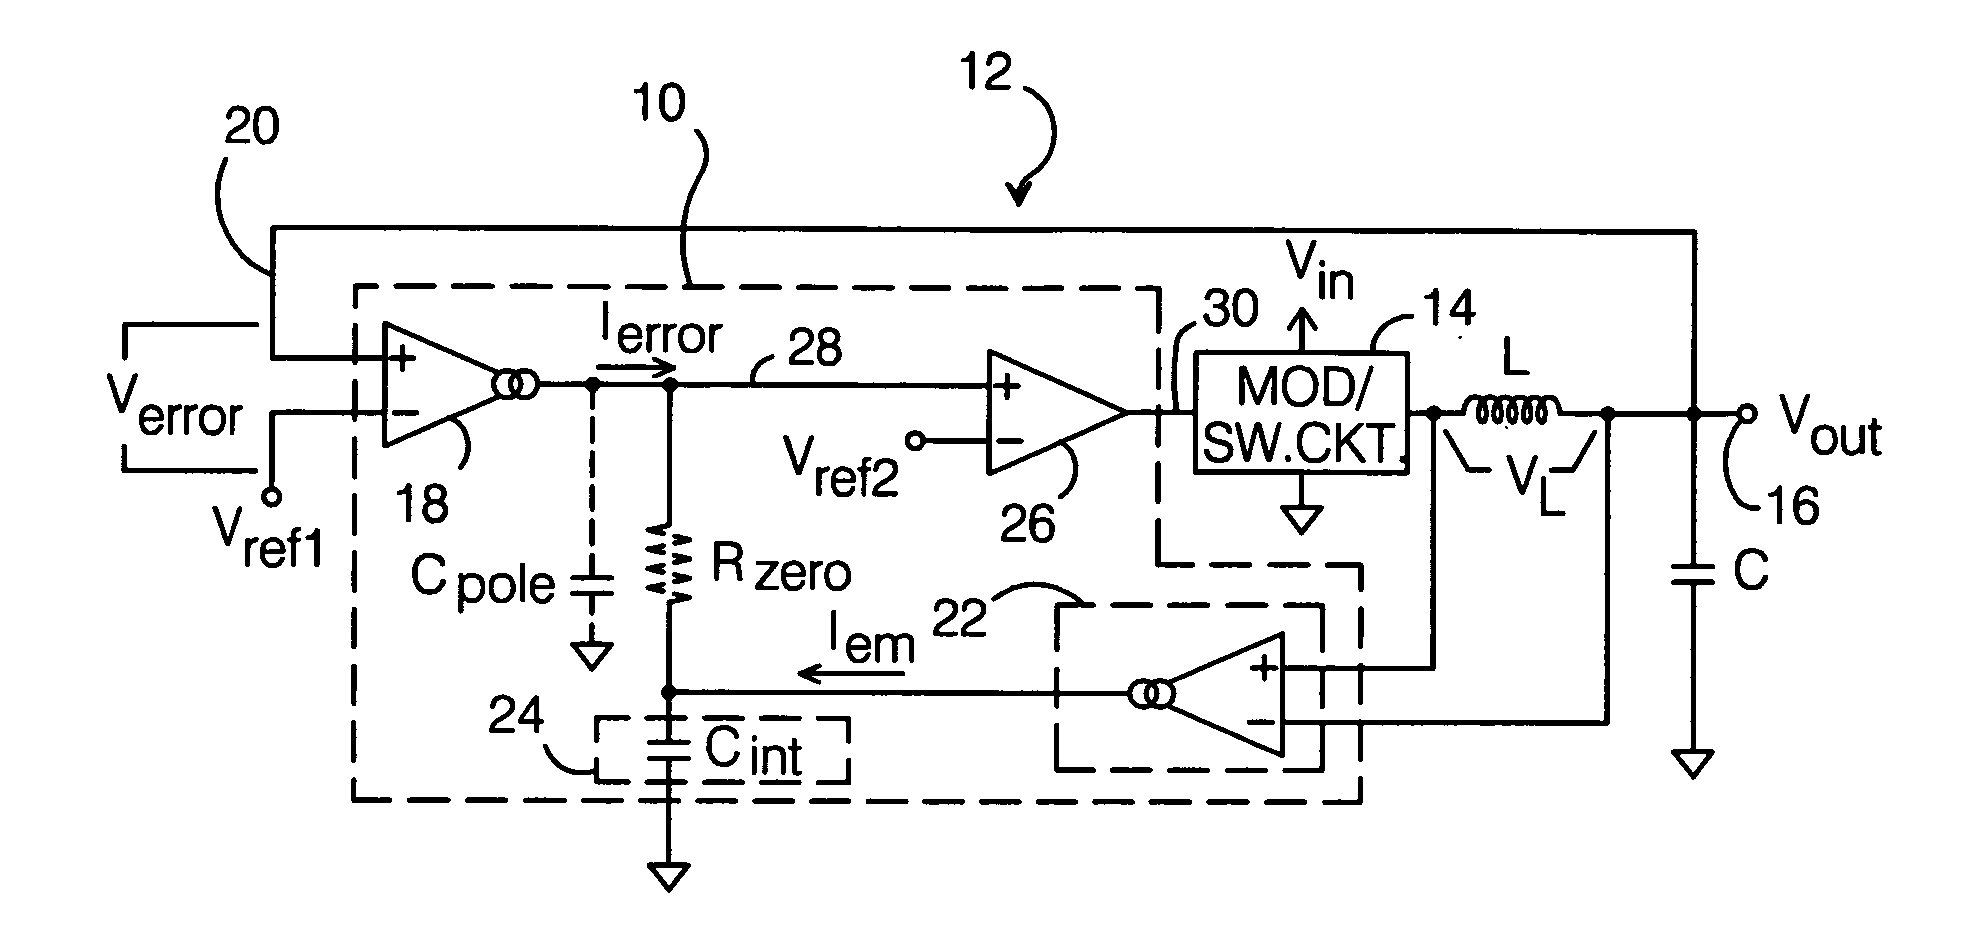 Single integrator sensorless current mode control for a switching power converter